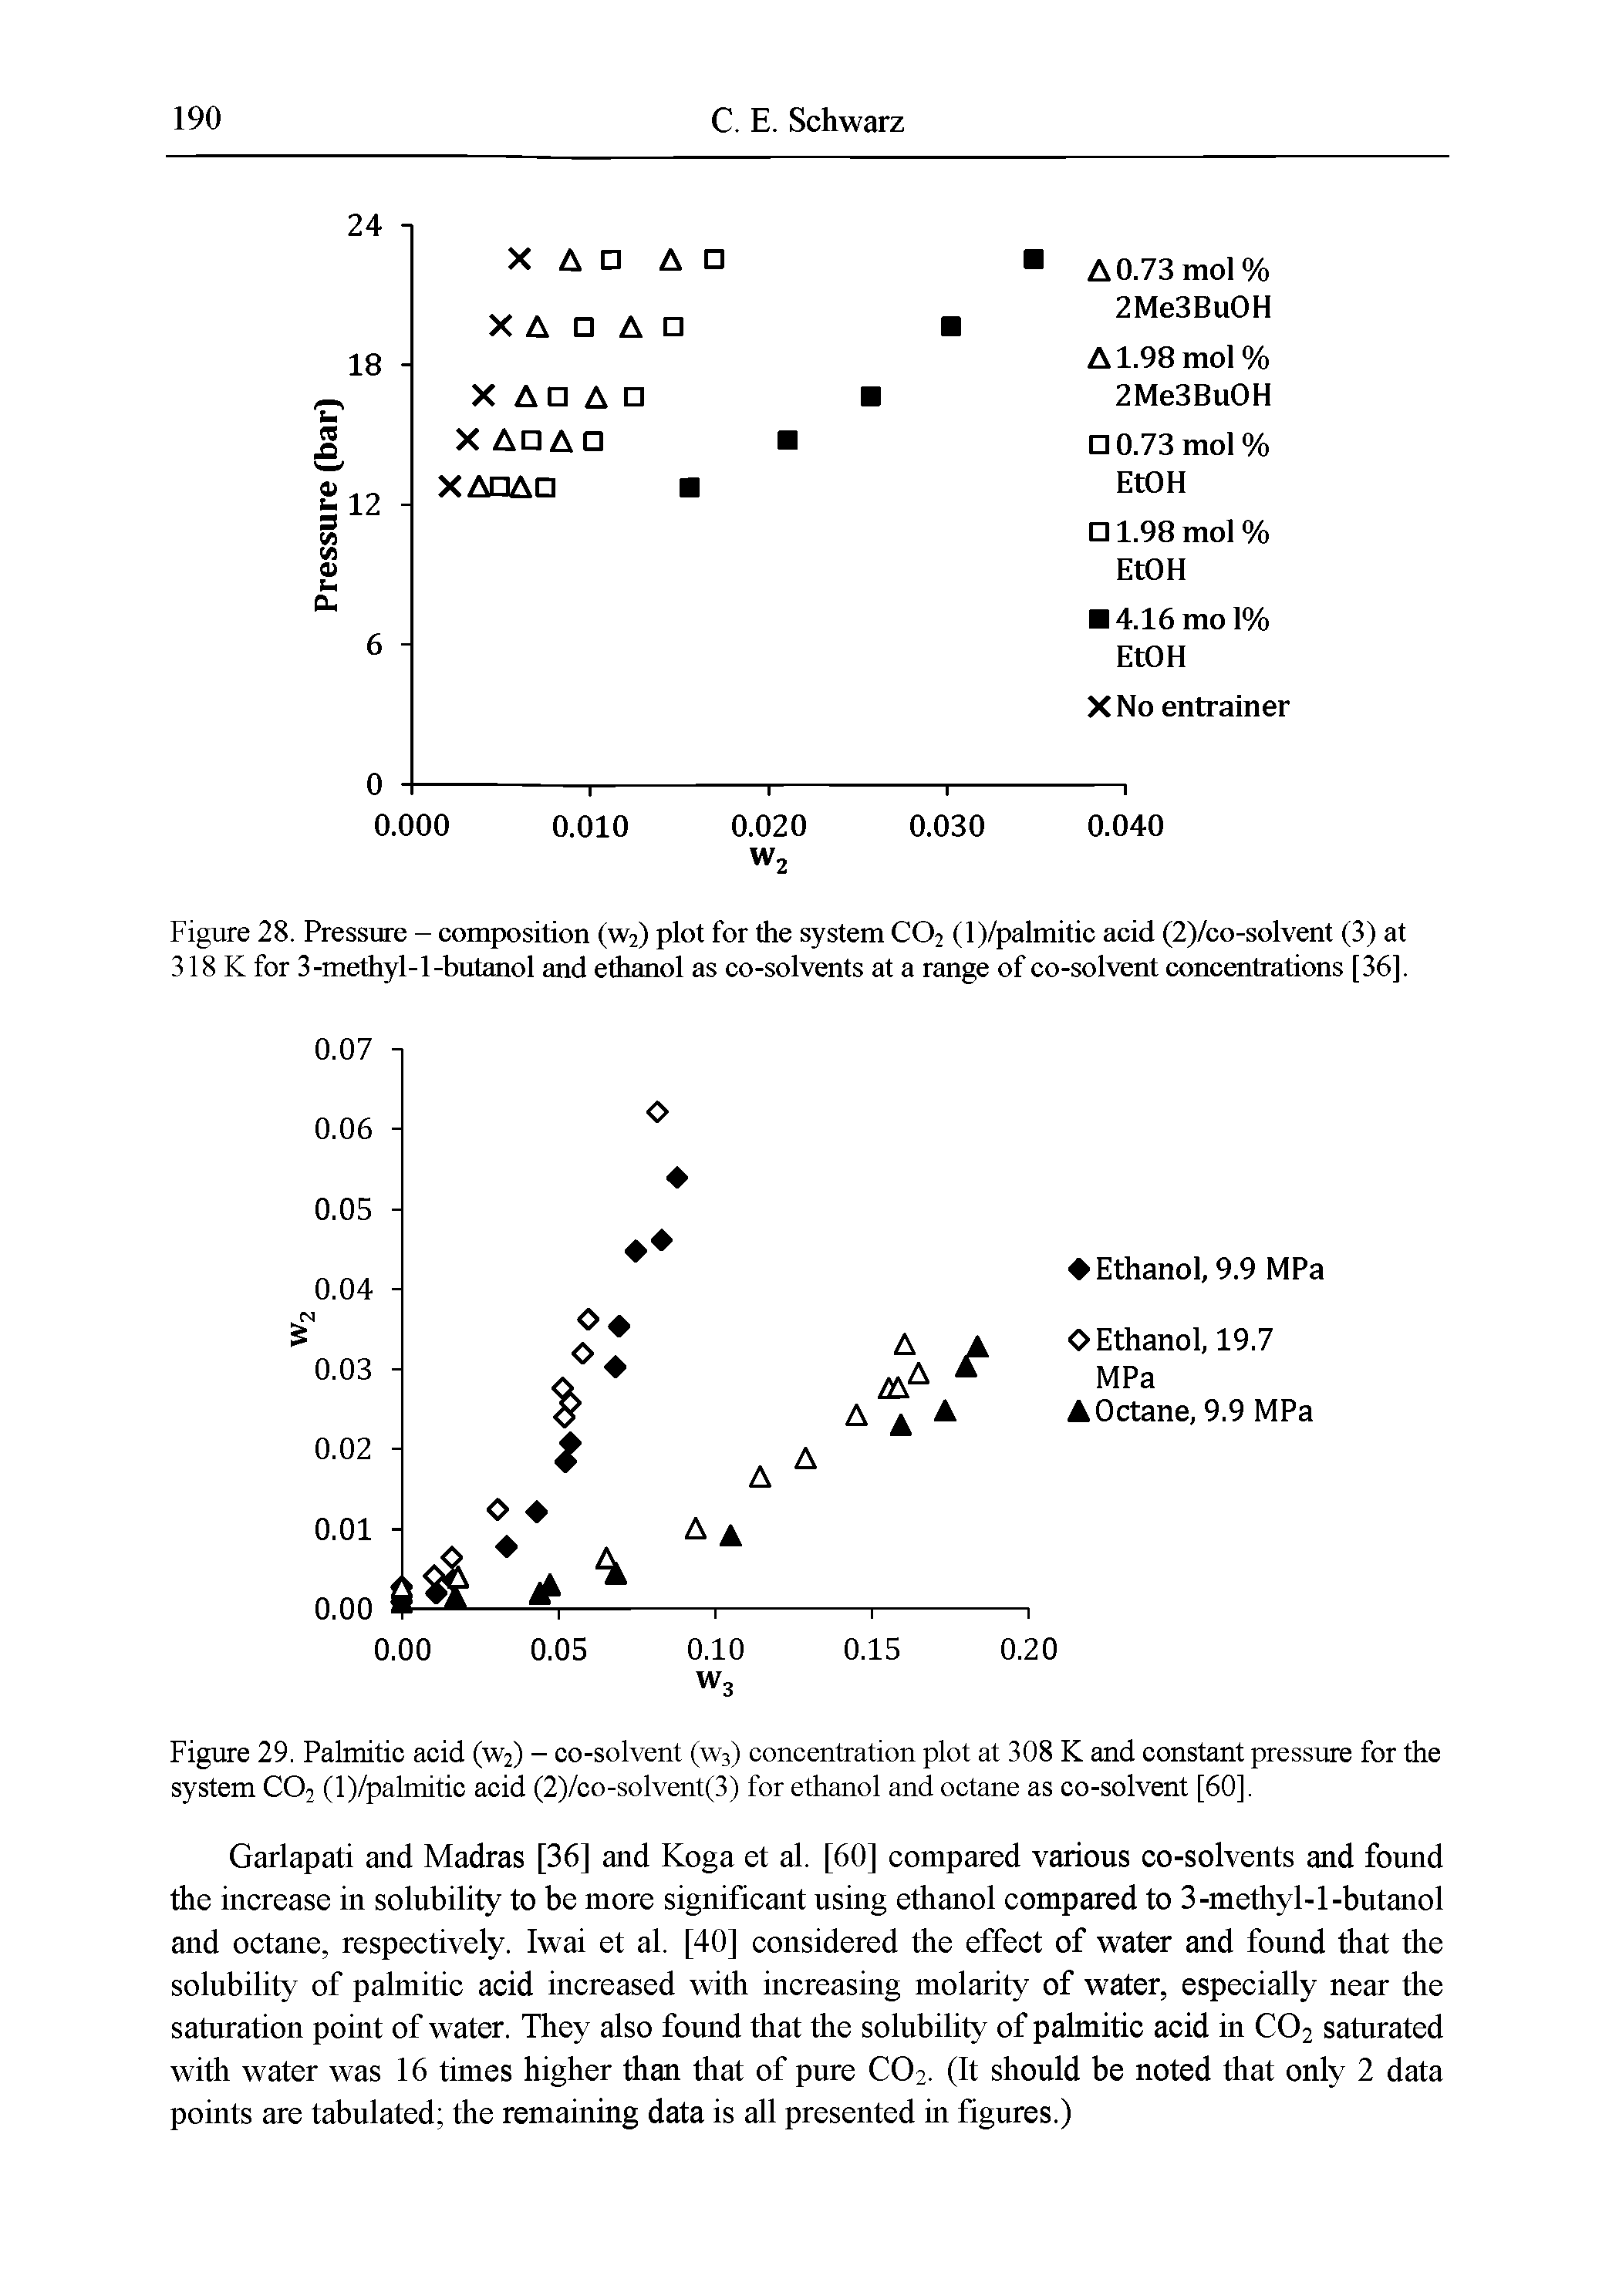 Figure 28. Pressure - composition (W2) plot for the system CO2 (l)/palmitic acid (2)/co-solvent (3) at 318 K for 3-methyl-1-butanol and ethanol as co-solvents at a range of co-solvent concentrations [36].